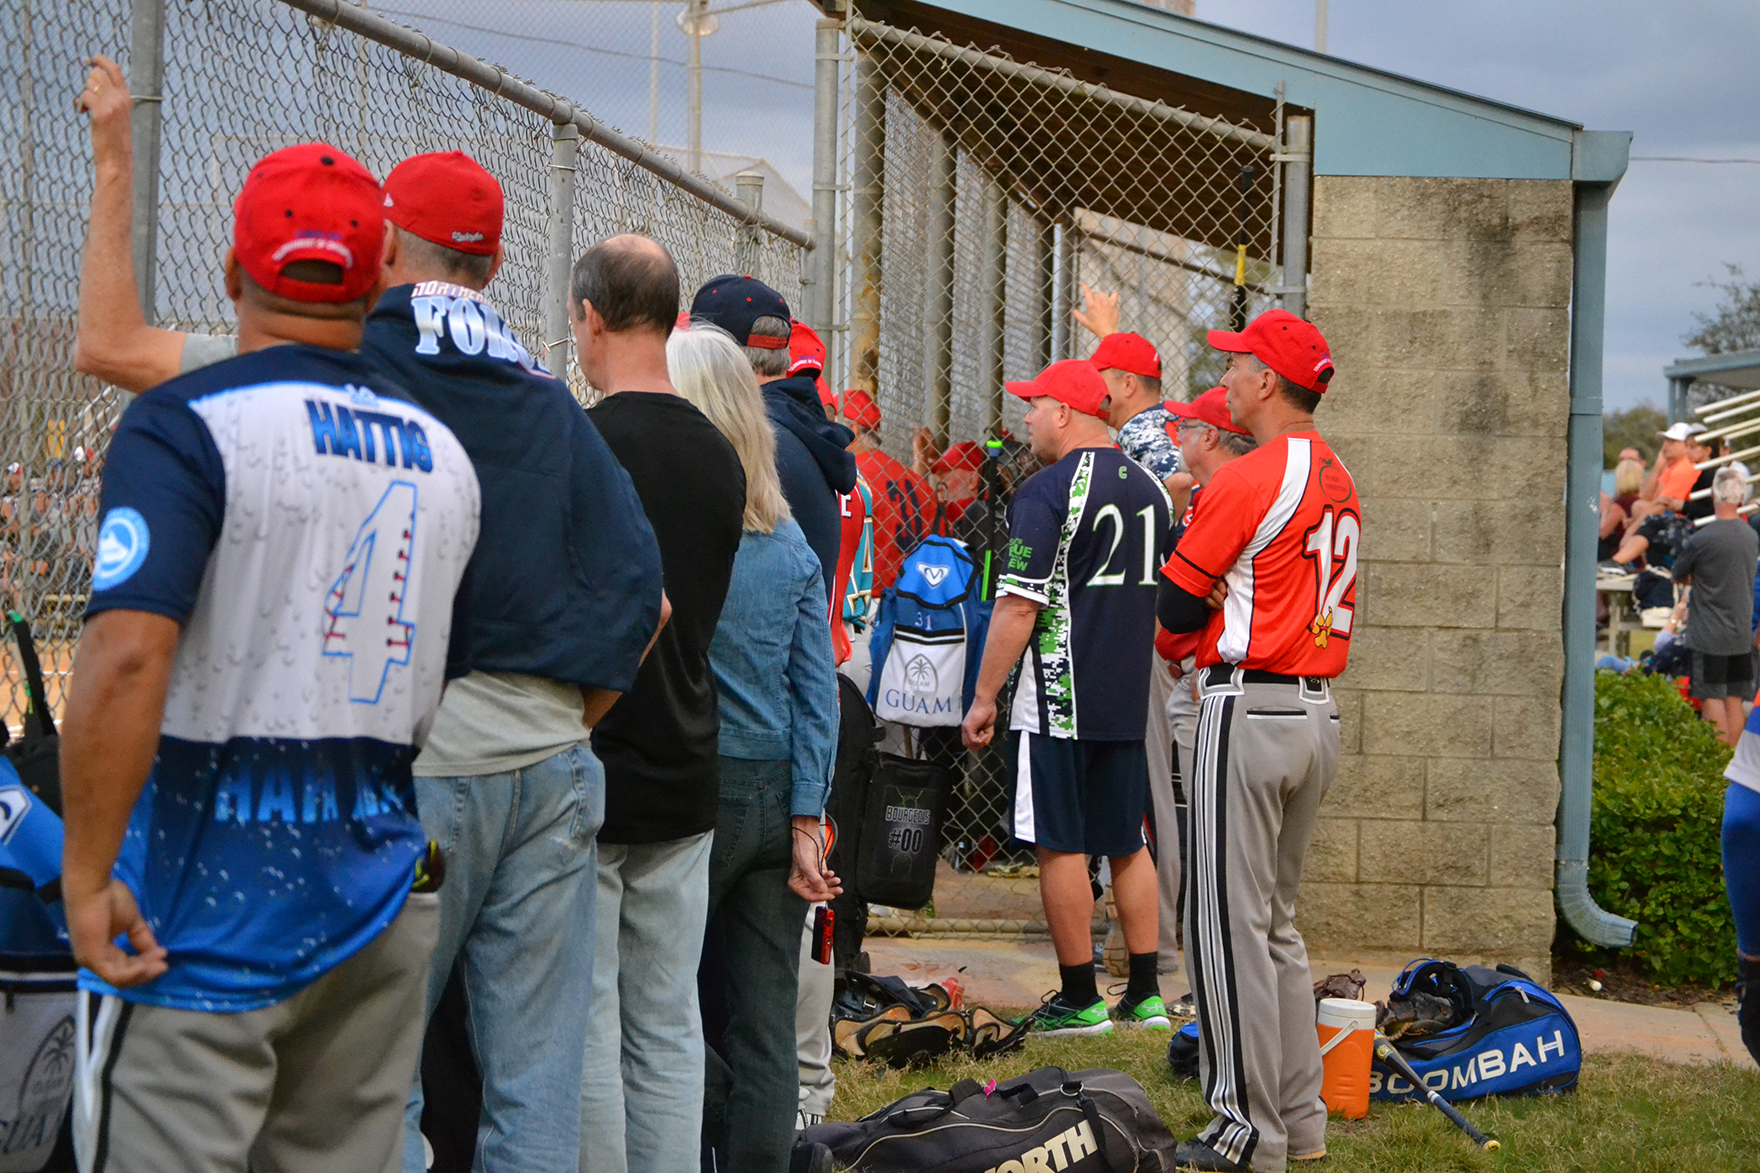 Players watch the action during a senior softball event